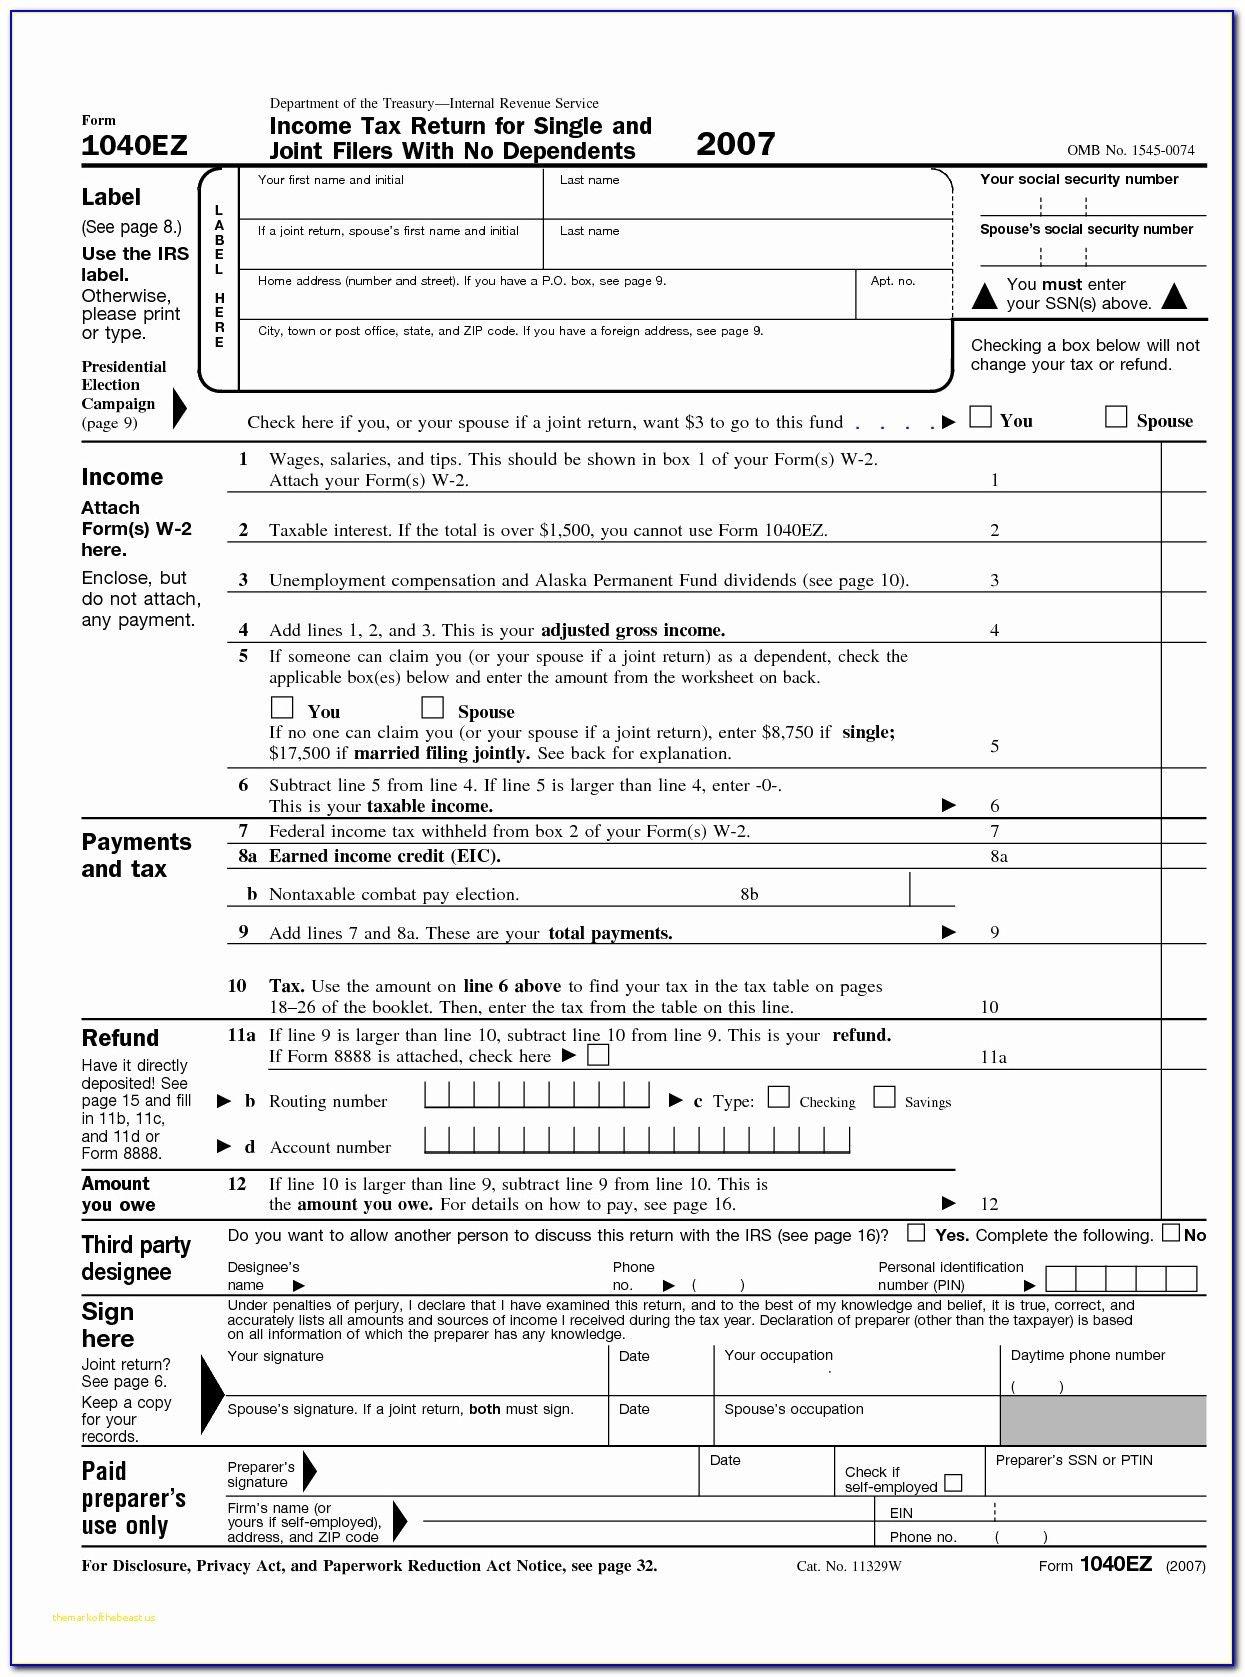 Printable Tax Forms Inspirational Irs Form 1040Ez Best 2015 1040 Tax - Free Printable Irs 1040 Forms